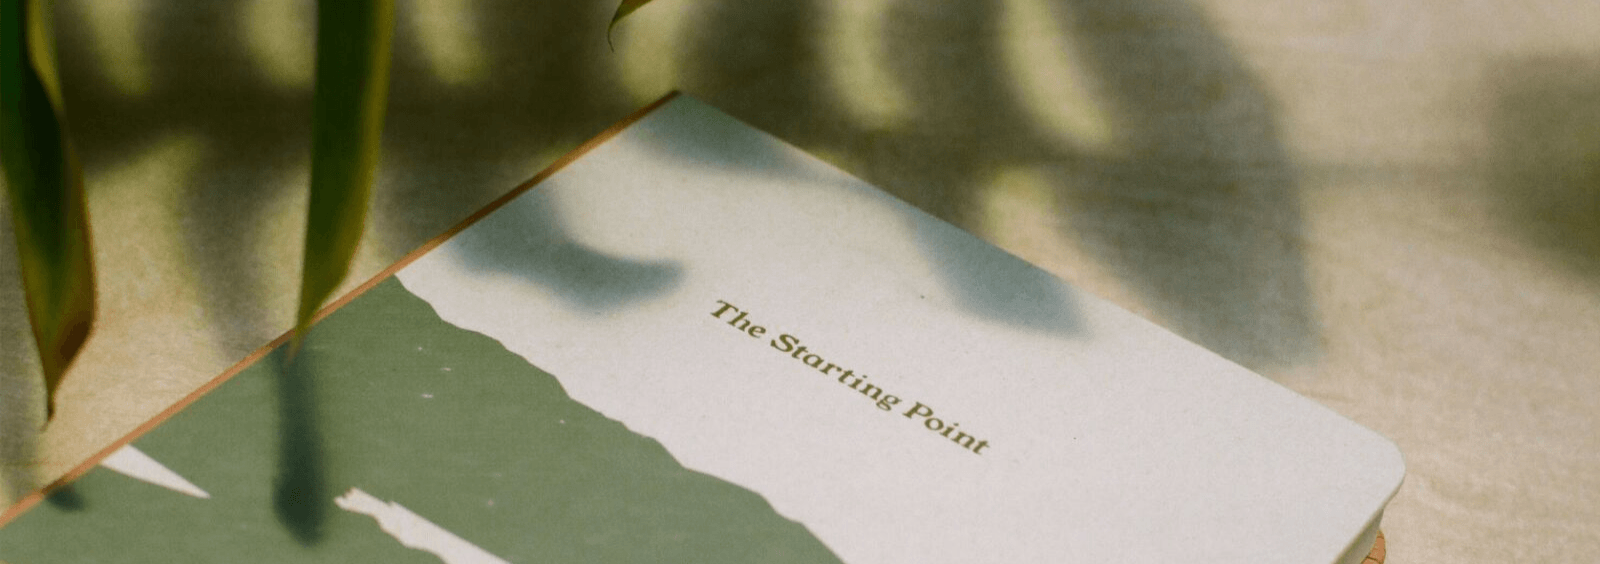 Introducing The Starting Point Journal